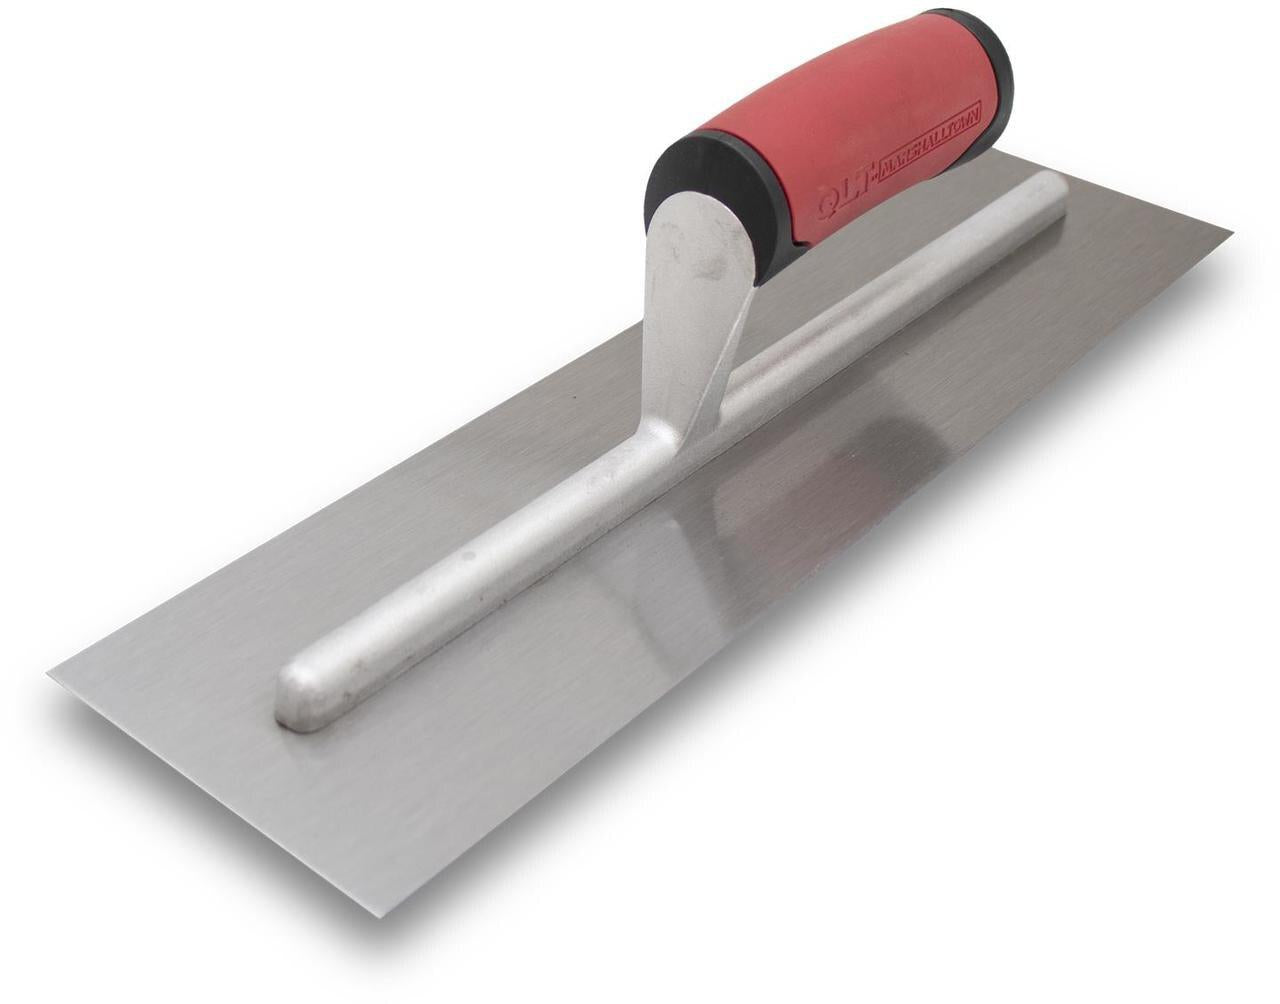 Marshalltown 11103 Concrete 14 X 4" Finishing Trowel with Soft Grip Handle